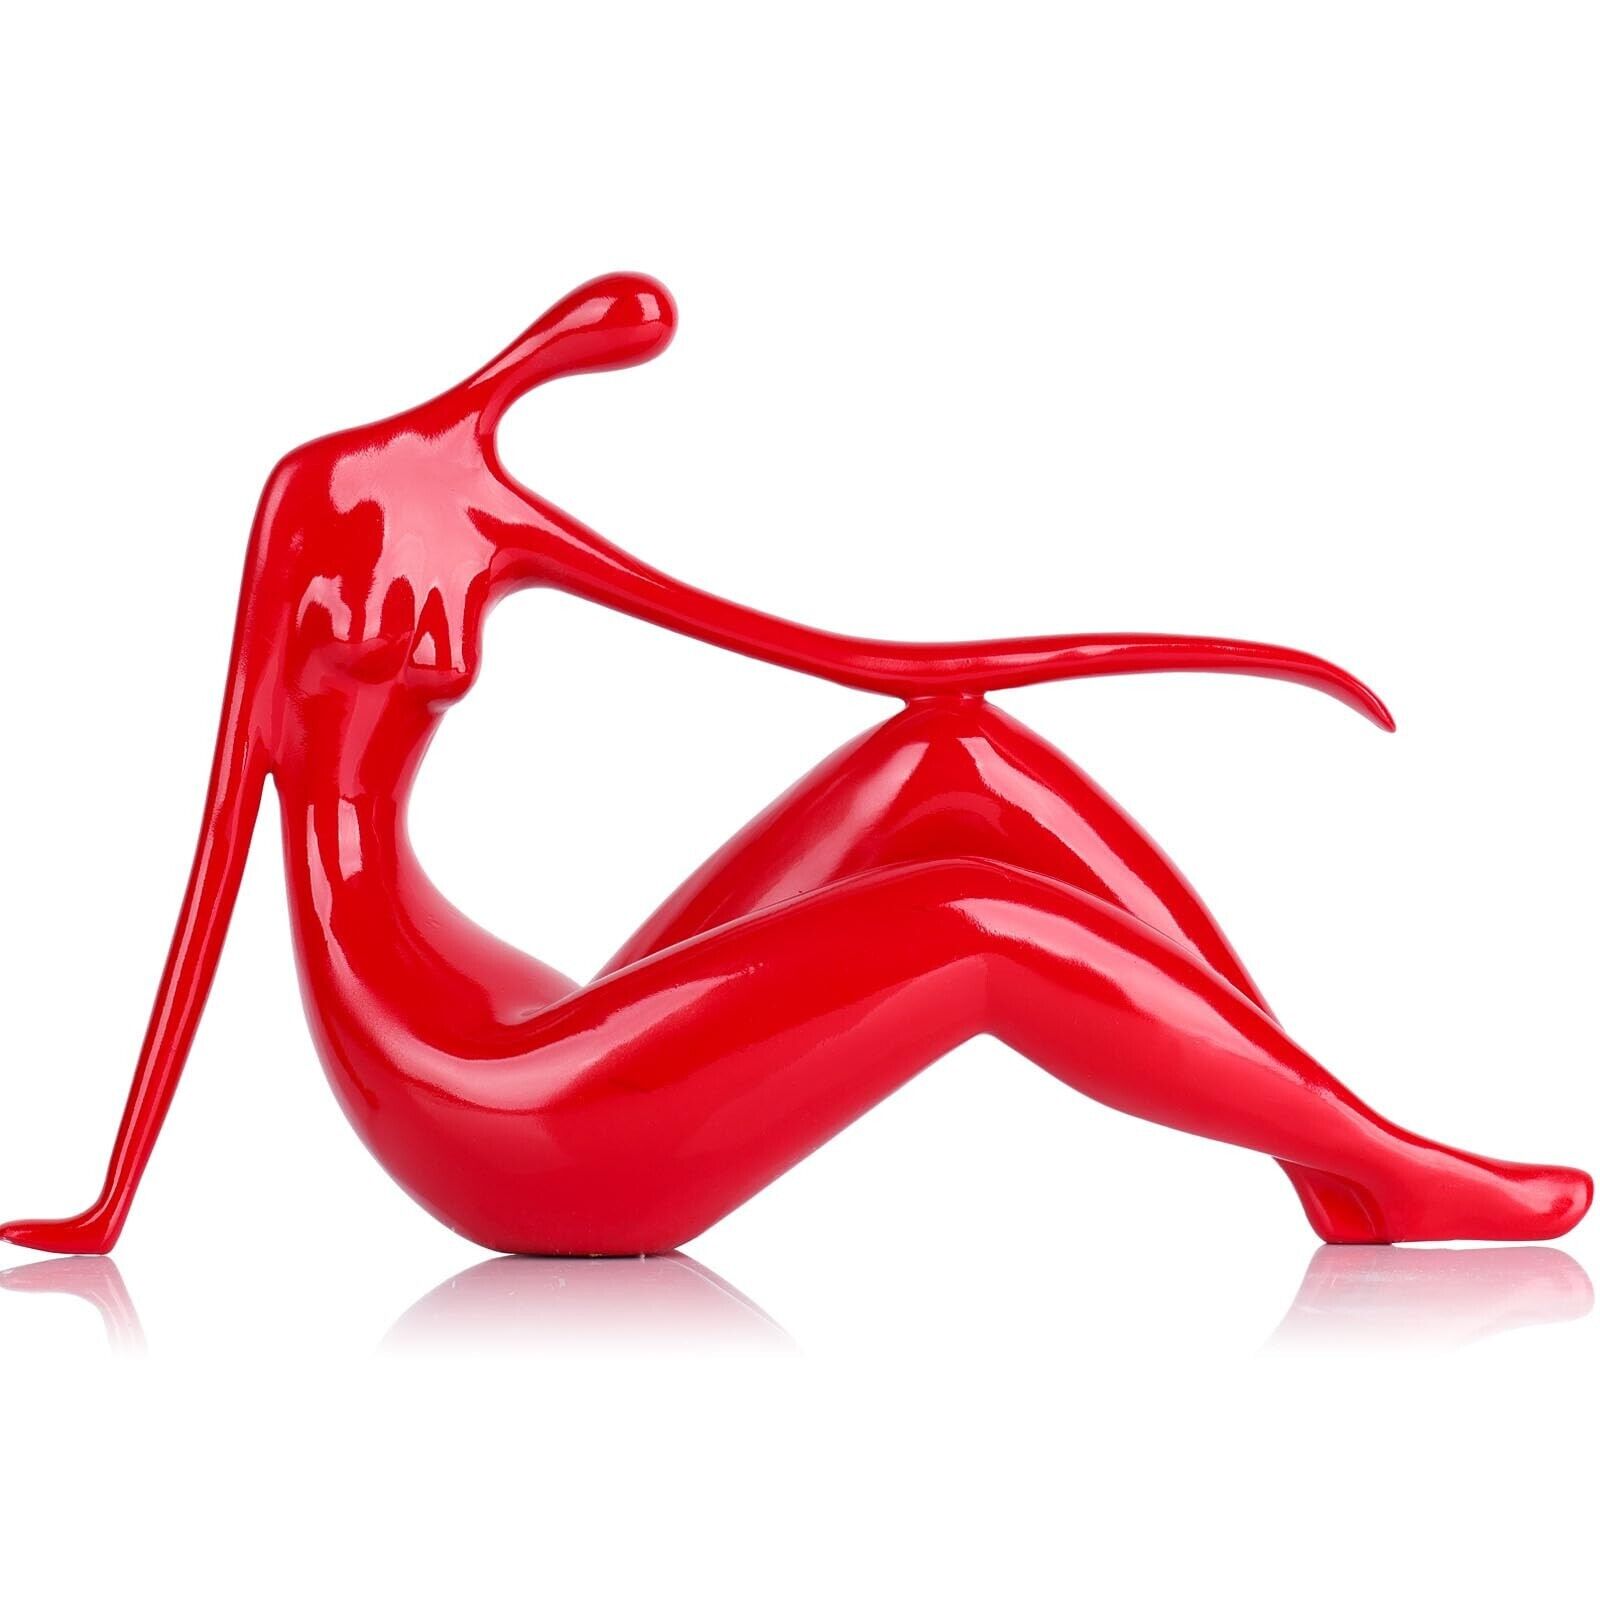 Red Lady Statue Figurine,Abstract Art Woman Sculpture Decor,Yoga Figurines an...